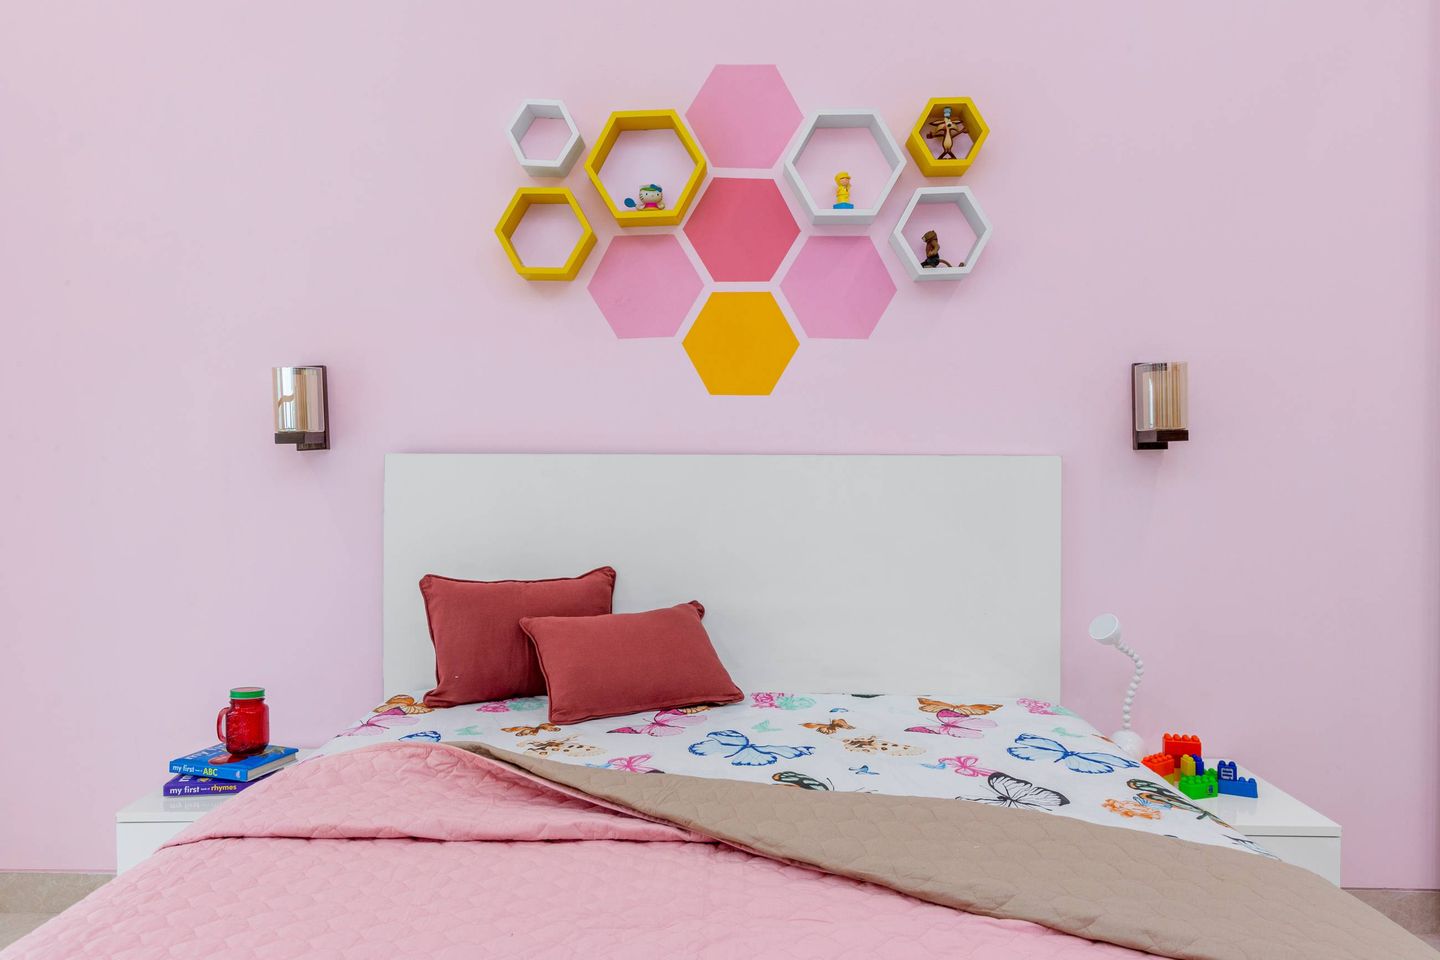 Shabby Chic White And Pink Kid's Room Design With Hexagonal Shelves